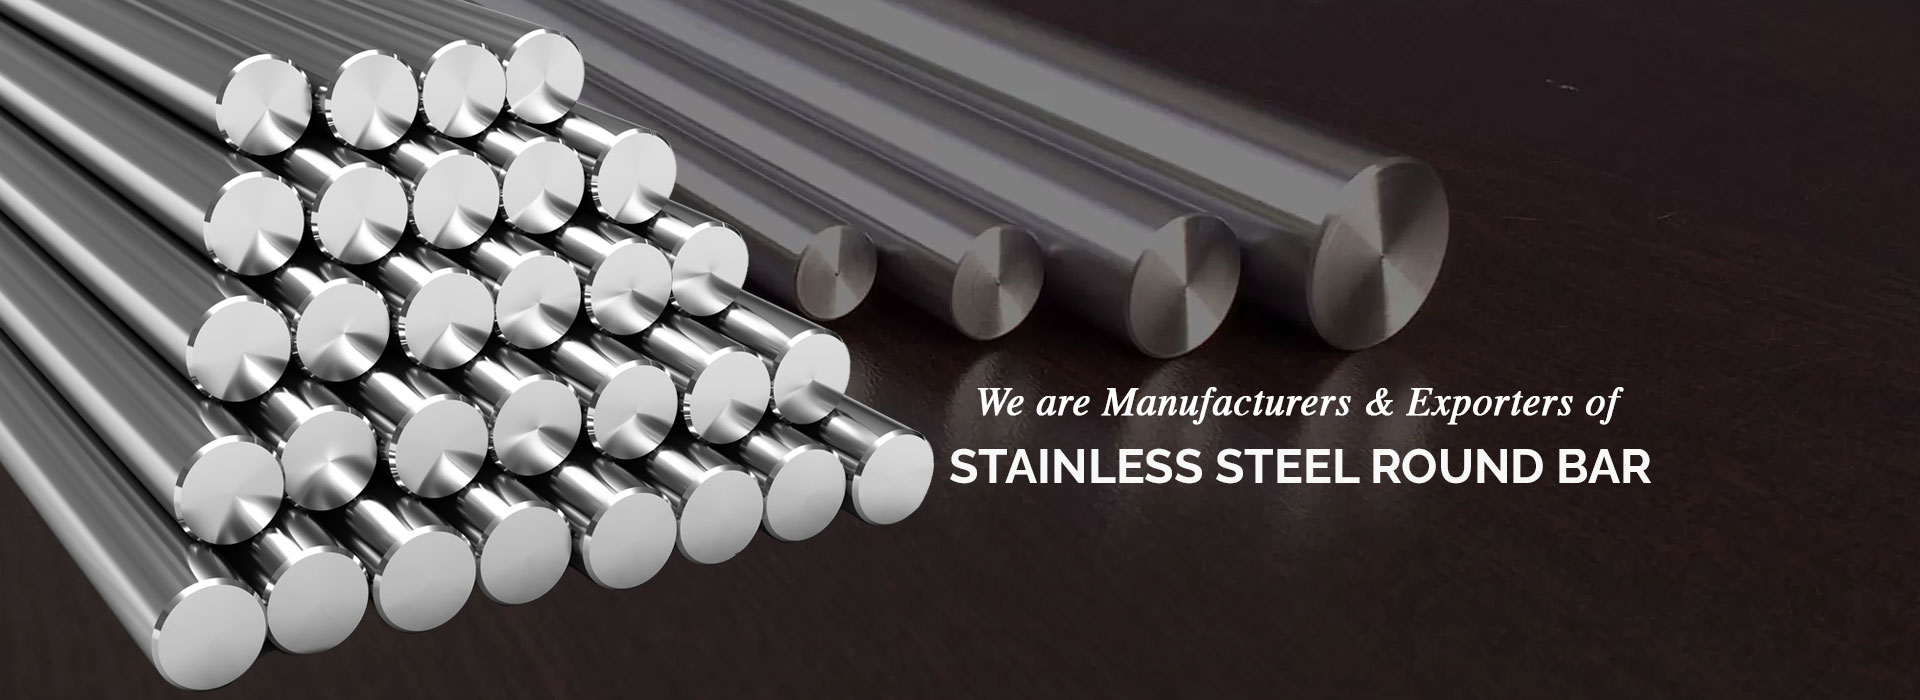 Stainless Steel Round Bar Manufacturers in Italy